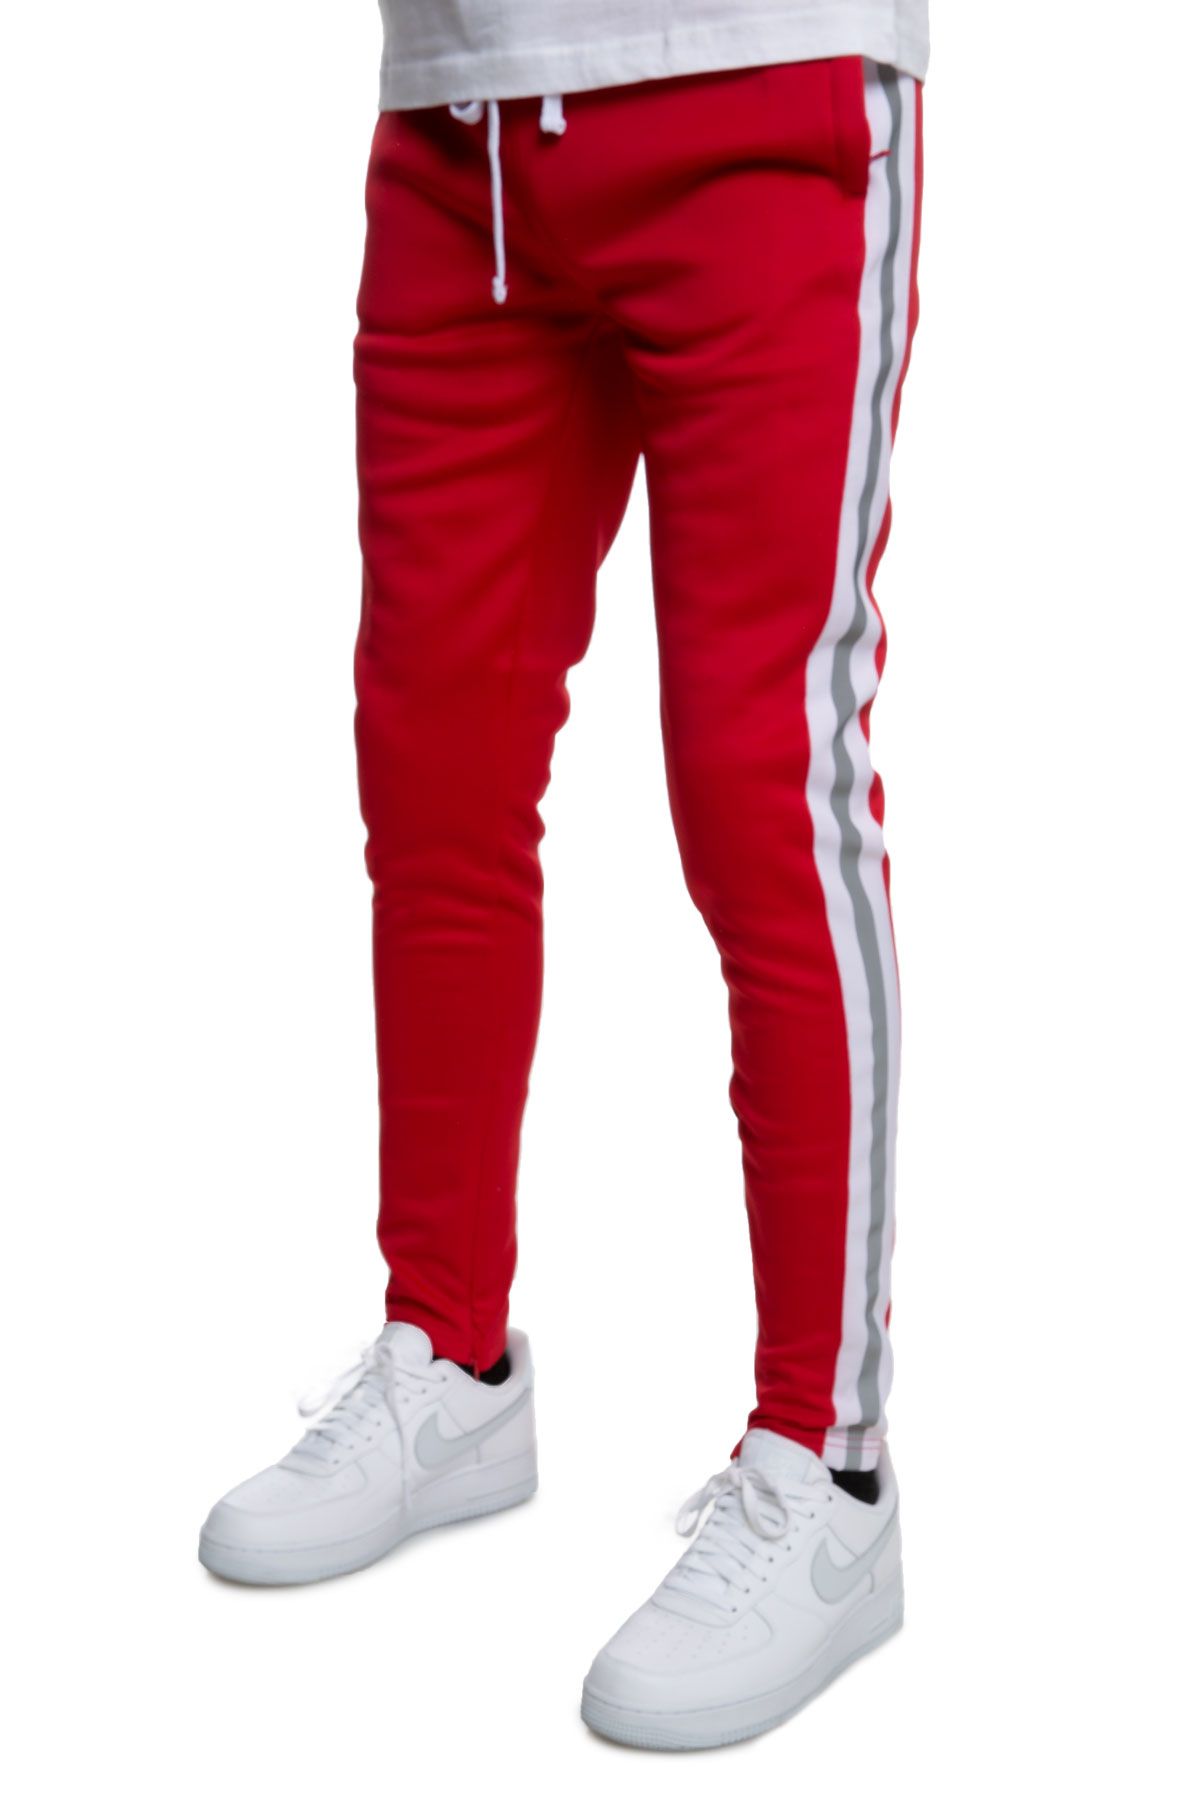 red and white jeans